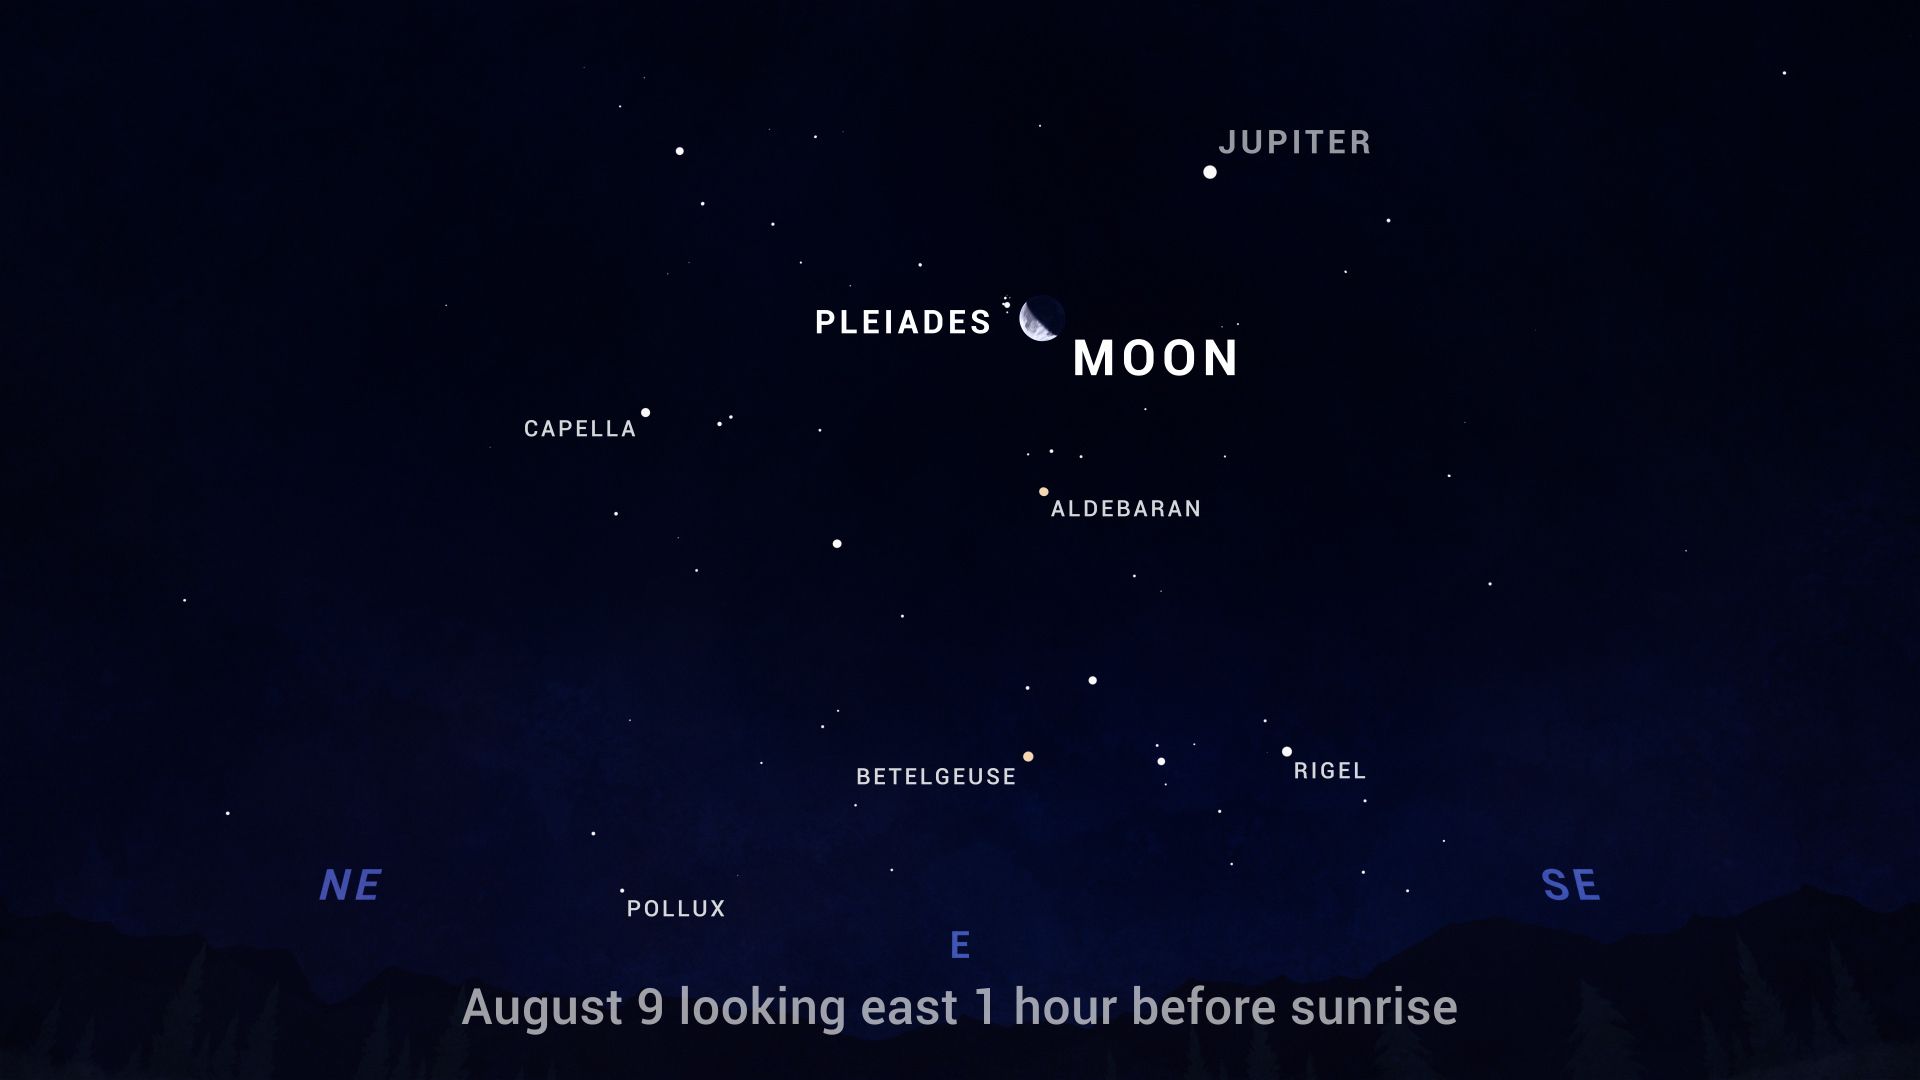 An illustrated sky chart shows the pre-dawn sky facing east, one hour before sunrise on August 9. The half-full Moon appears above center, just to the right of a cluster of small white dots representing the stars of the Pleiades star cluster. Jupiter is a bright dot above them. Several other bright stars are labeled on the sky as well.